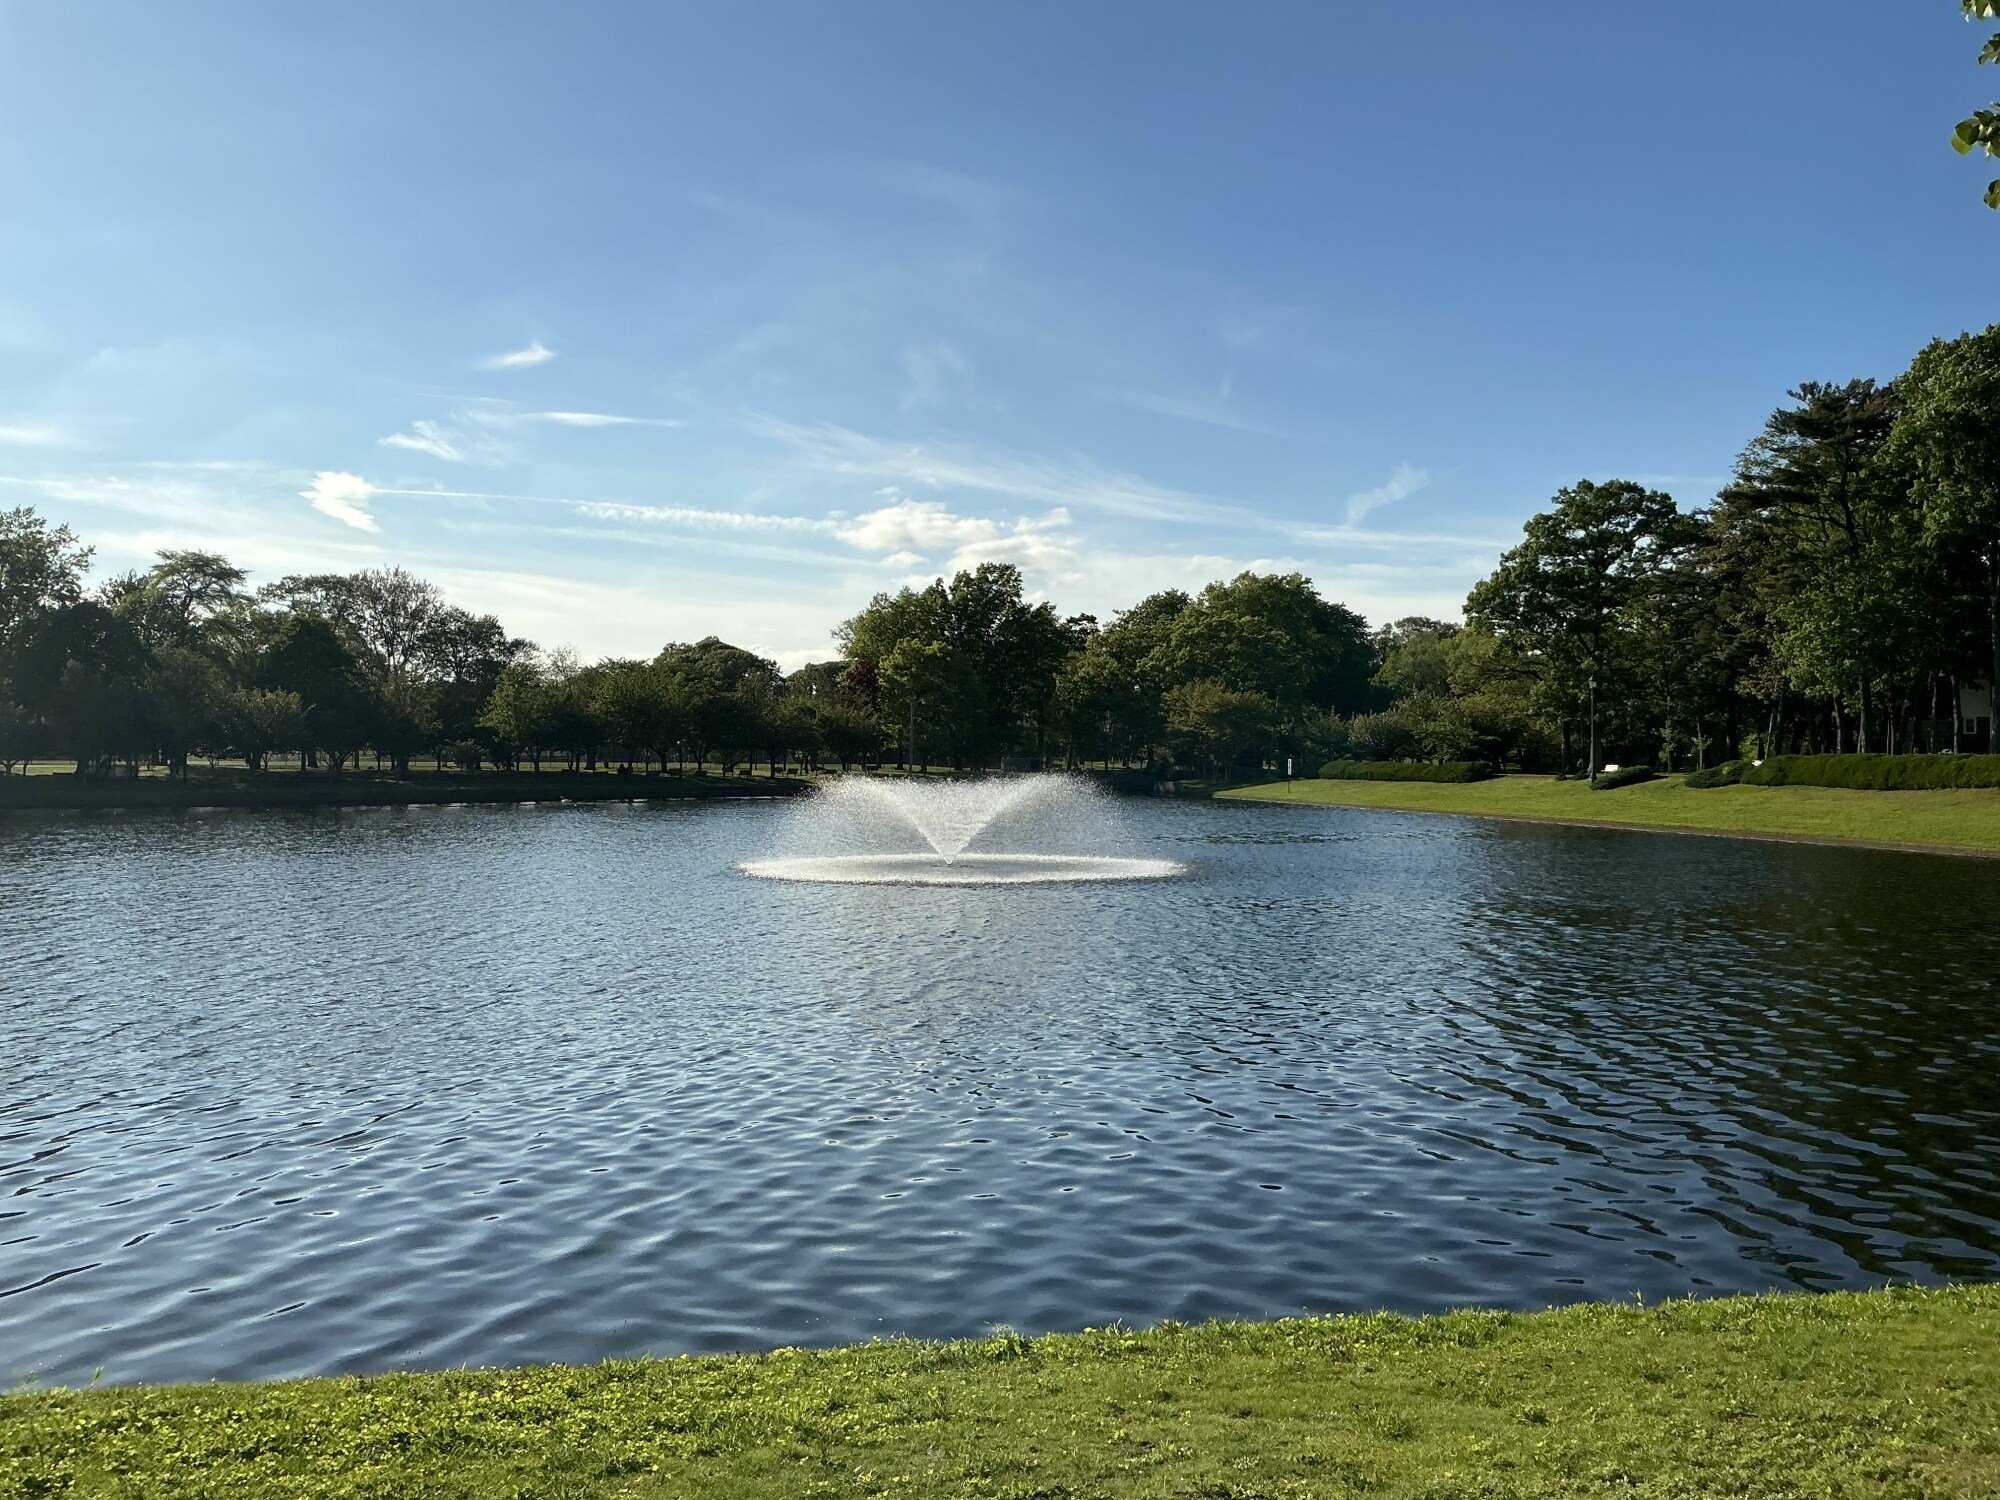 M4 iPad Pro capturing scenic area with a fountain in a pond aerating water